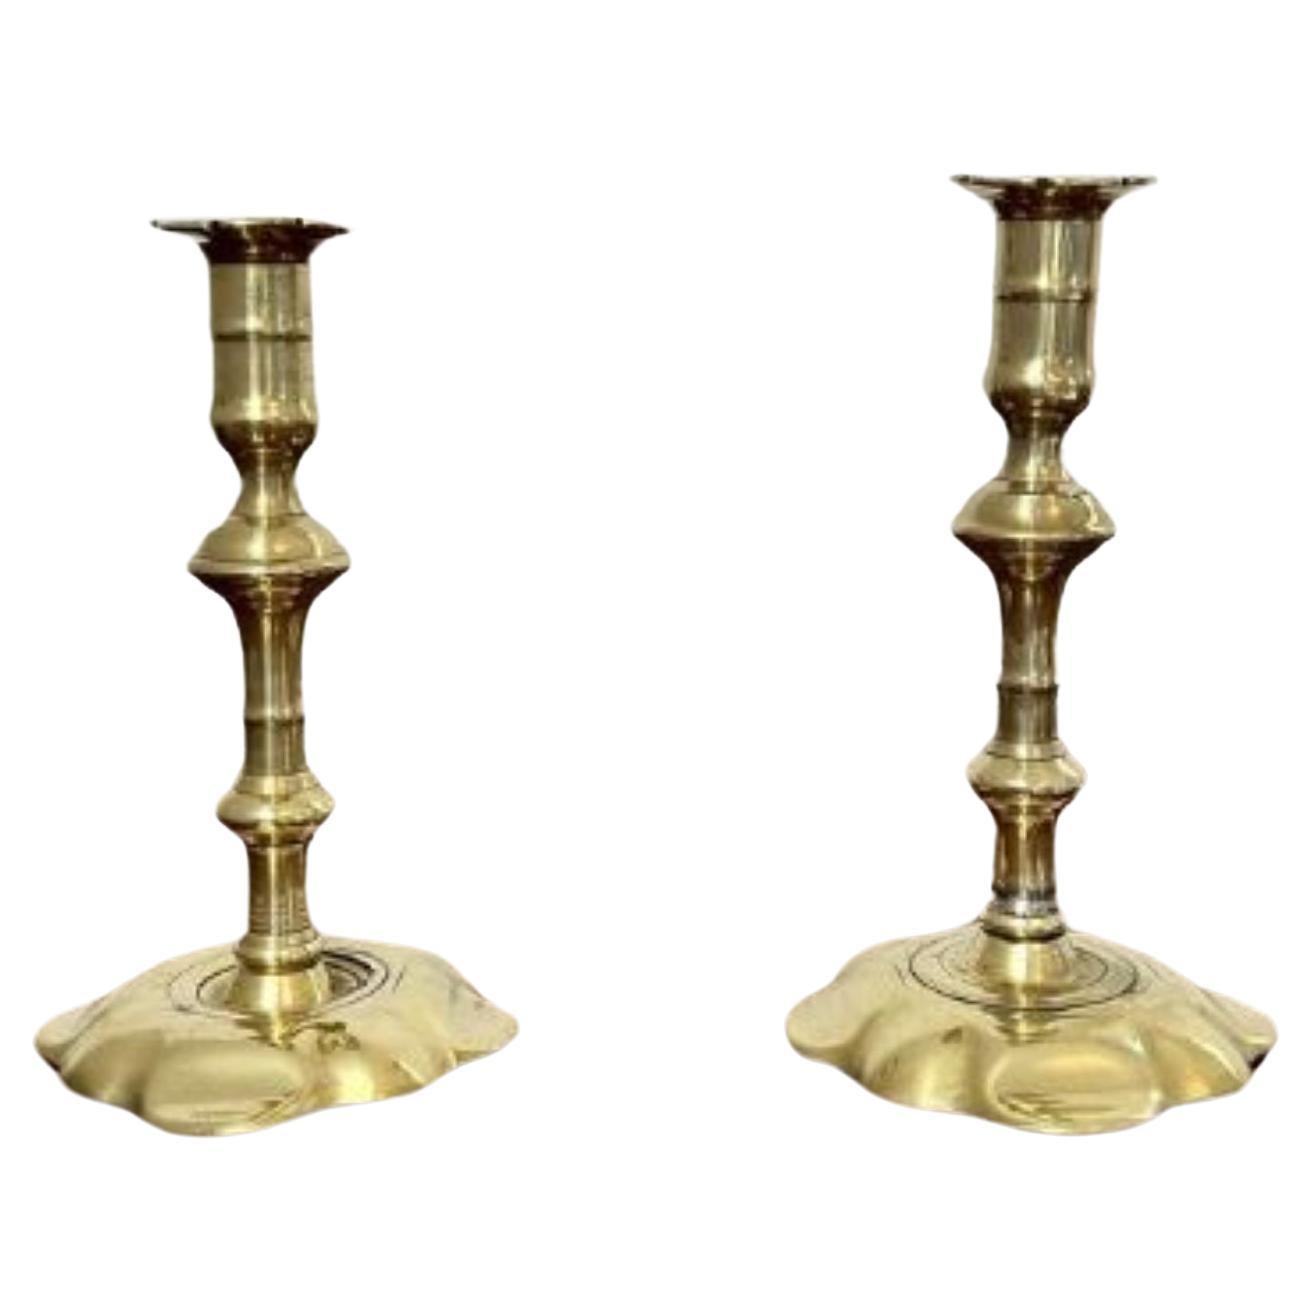 Quality pair of antique Queen Ann brass candlesticks For Sale